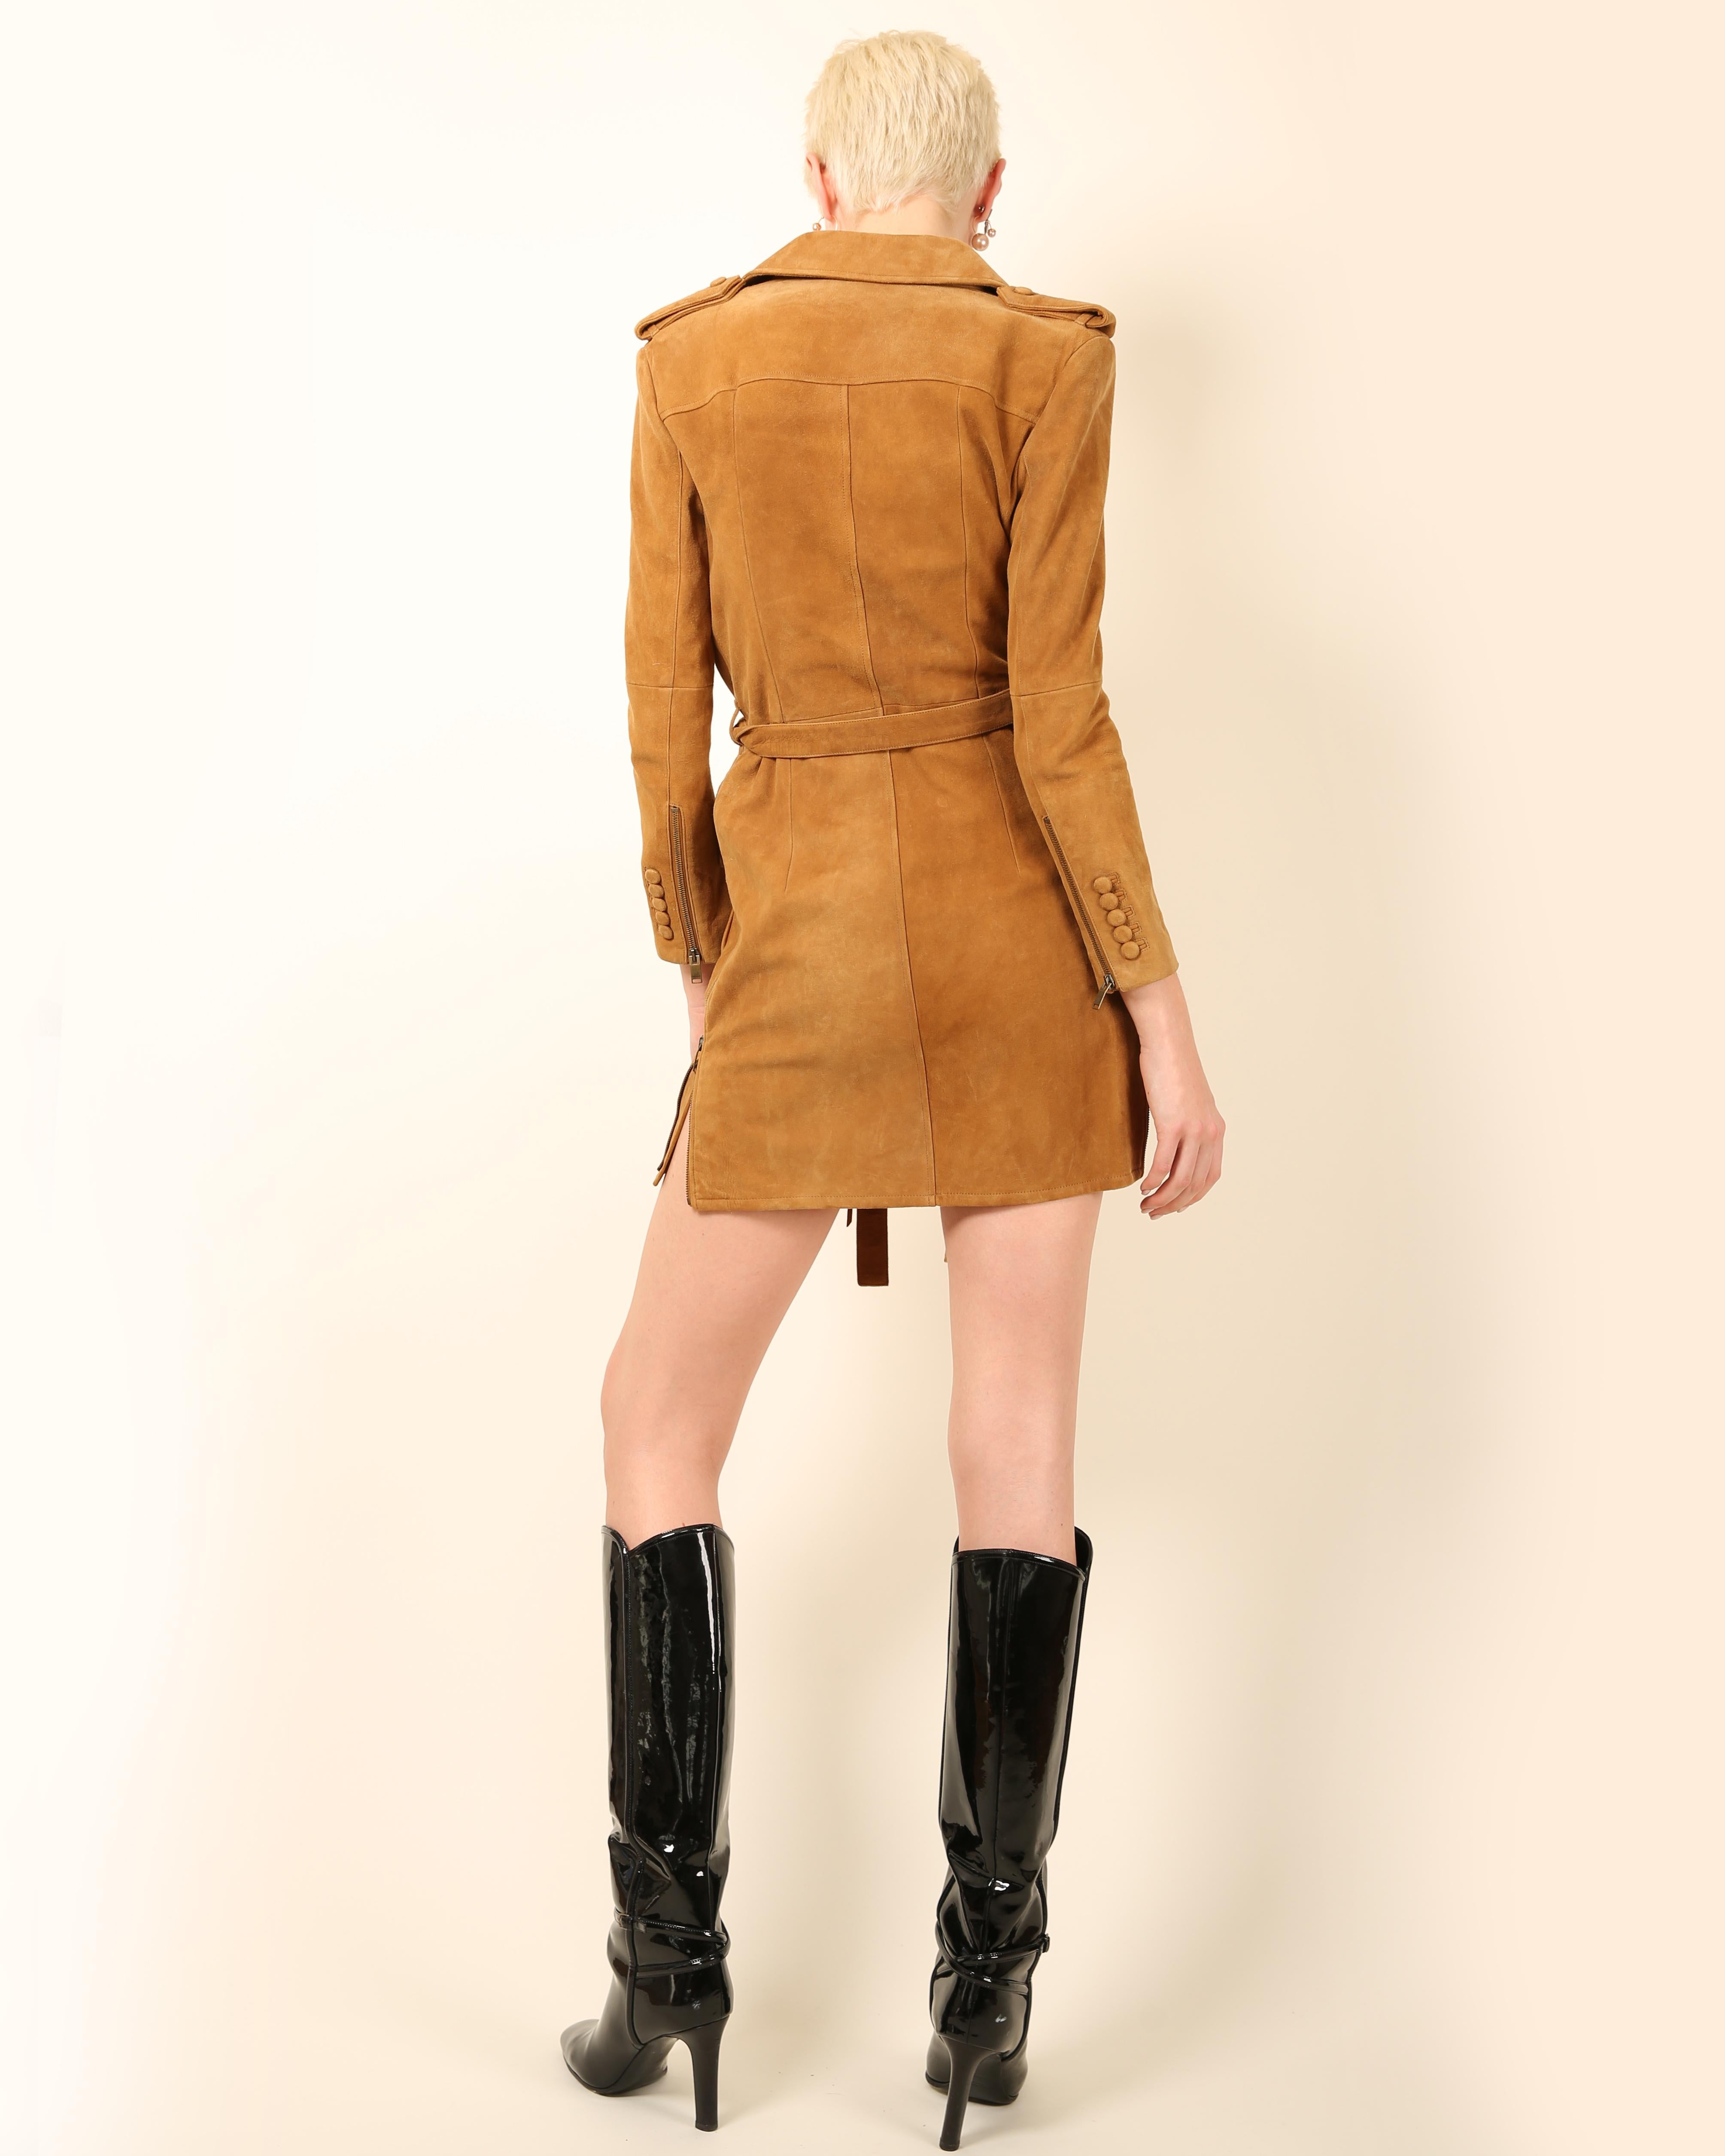 Saint Laurent S/S 13 tan suede leather safari style lace up belted mini dress  For Sale 7